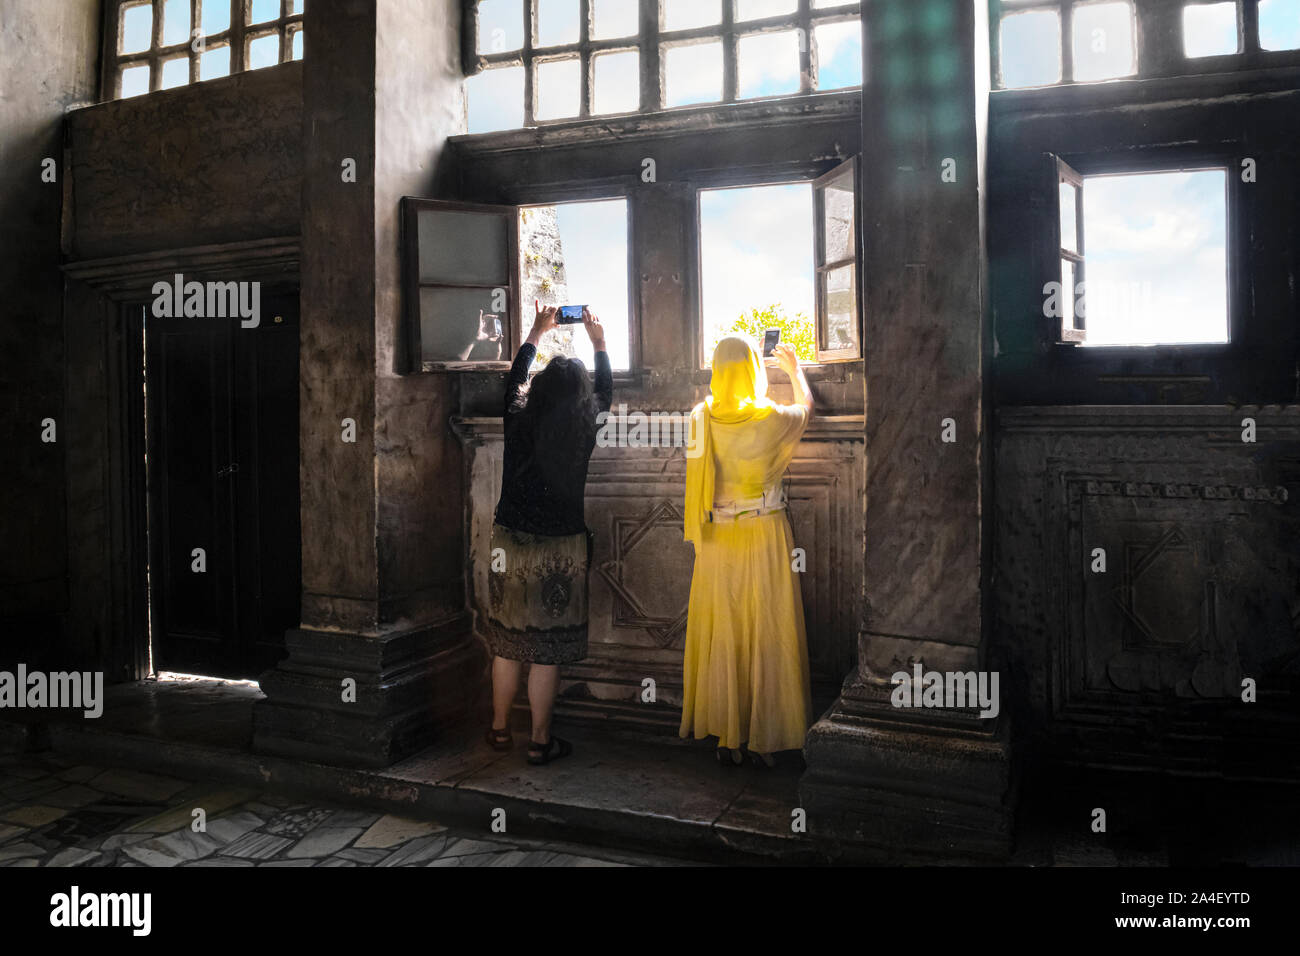 A muslim woman with traditional burqa abaya and a non-muslim woman take cell phone photos out a window in the Hagia Sophia in Istanbul, Turkey Stock Photo